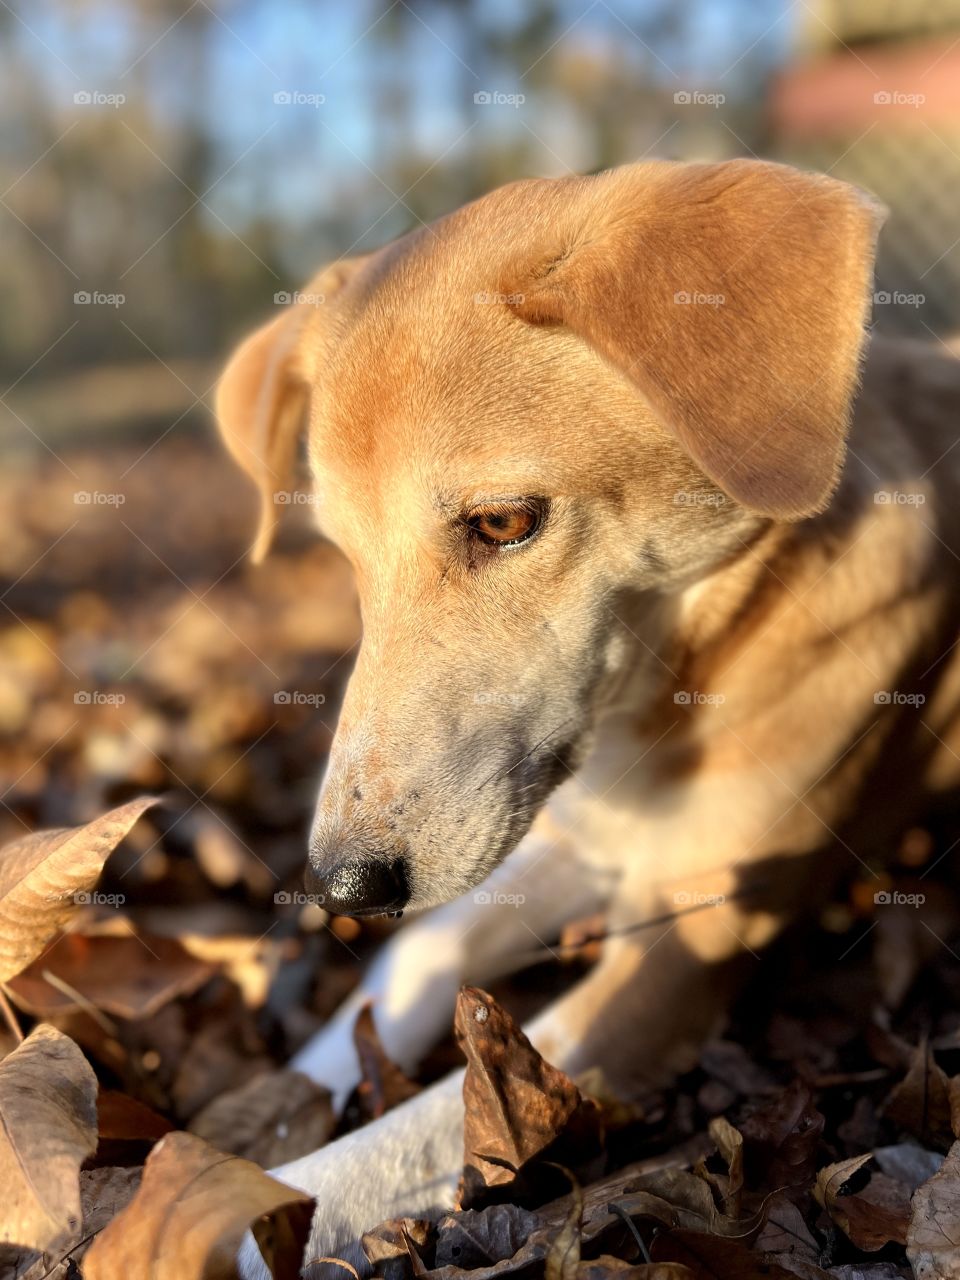 Closeup of pet hound dog in fallen leaves looking away